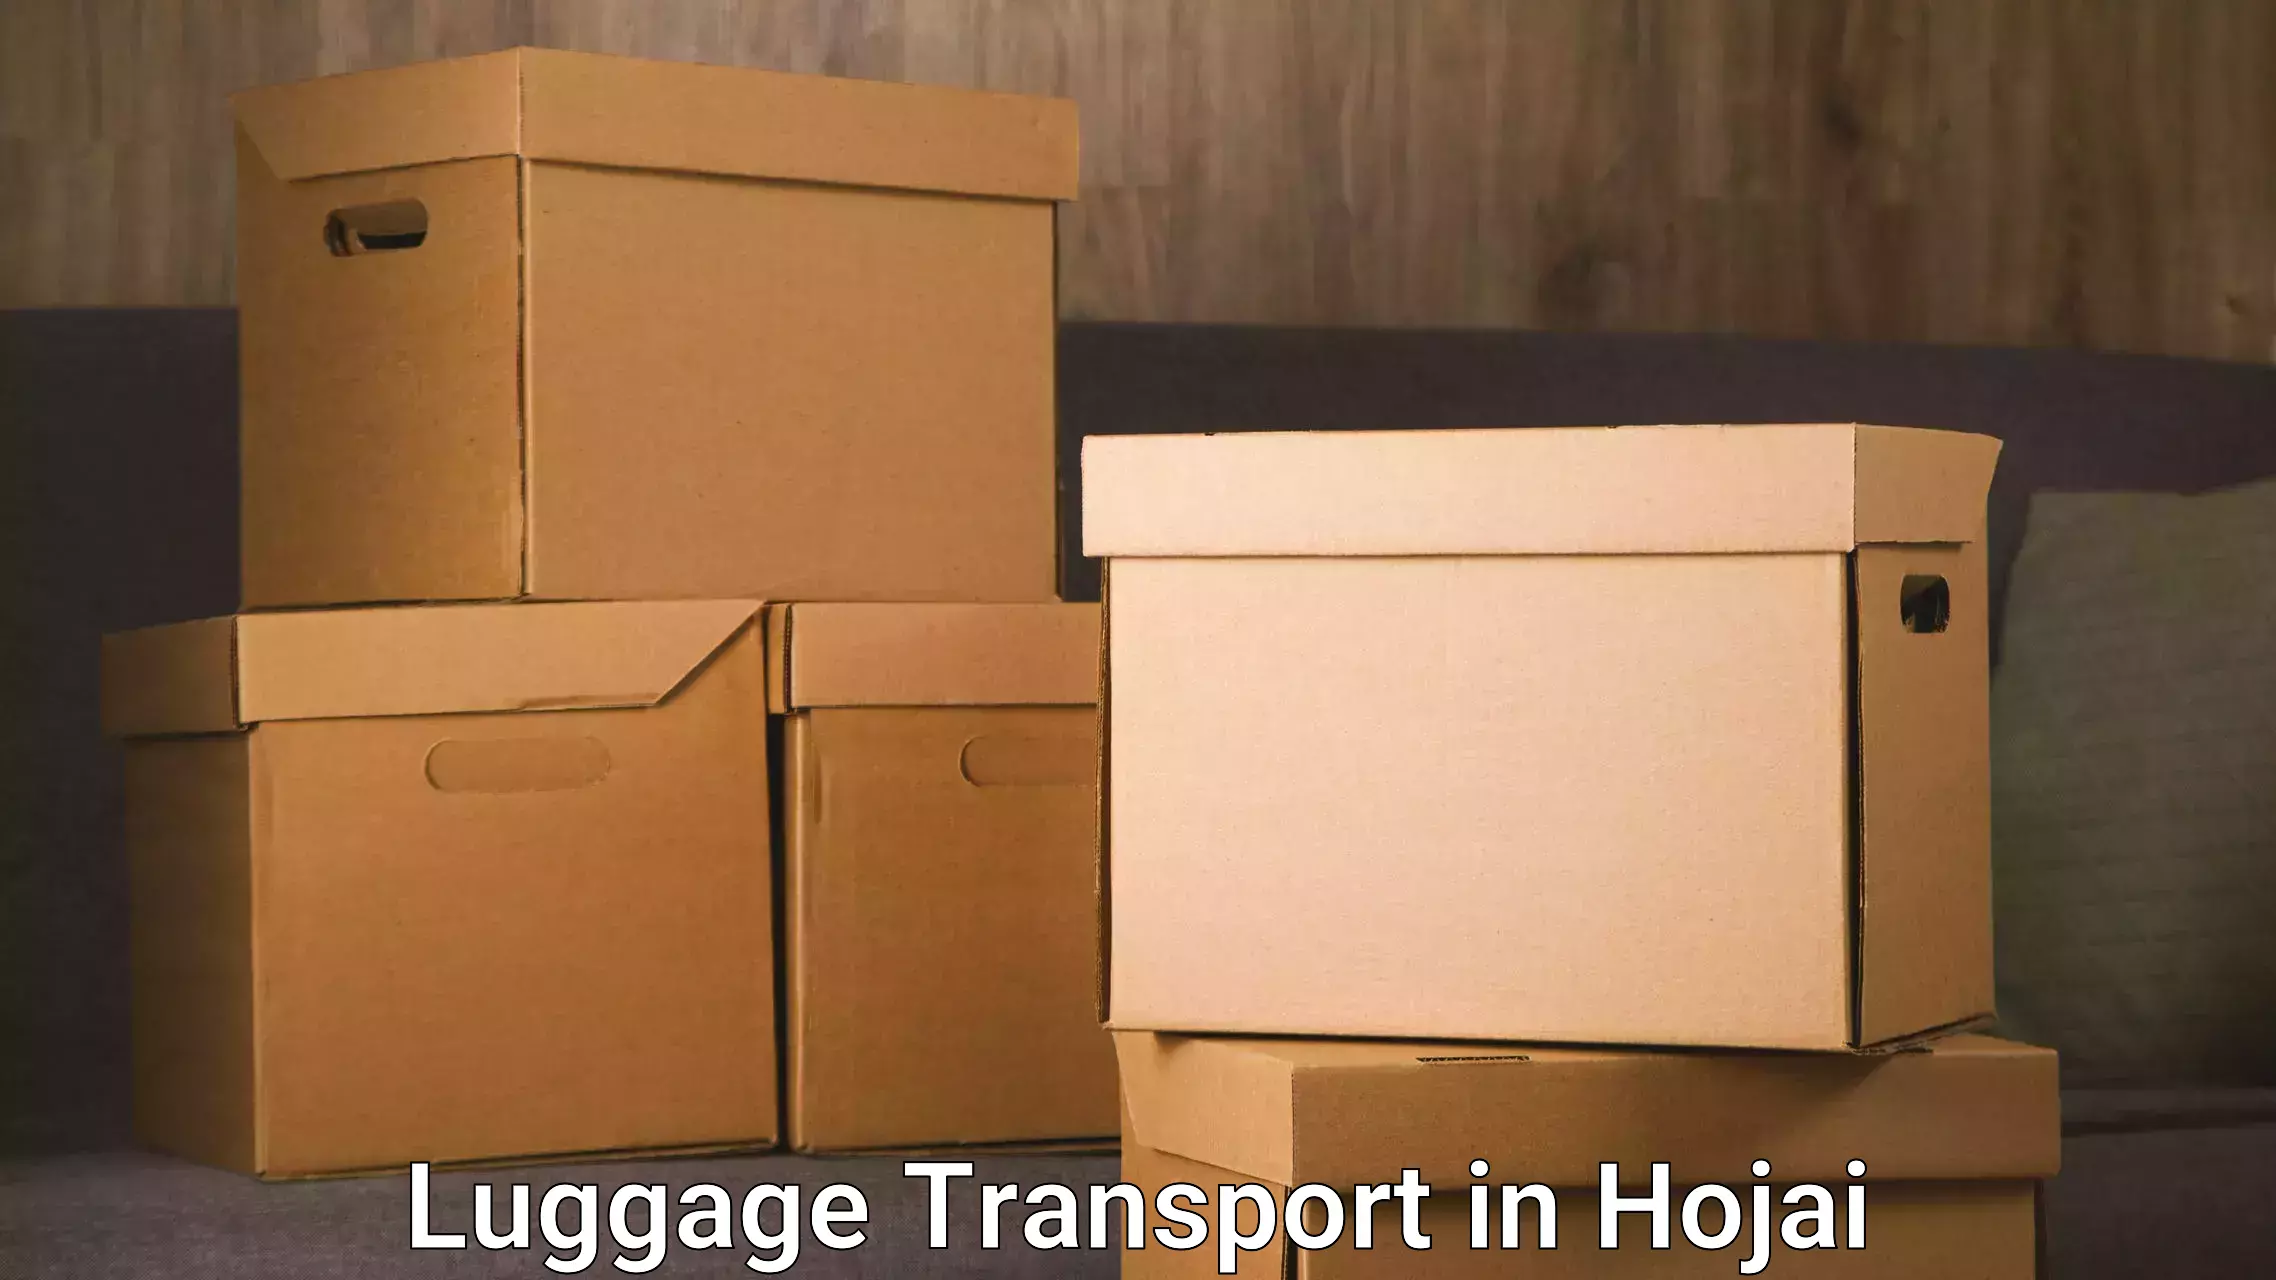 Luggage transport solutions in Hojai